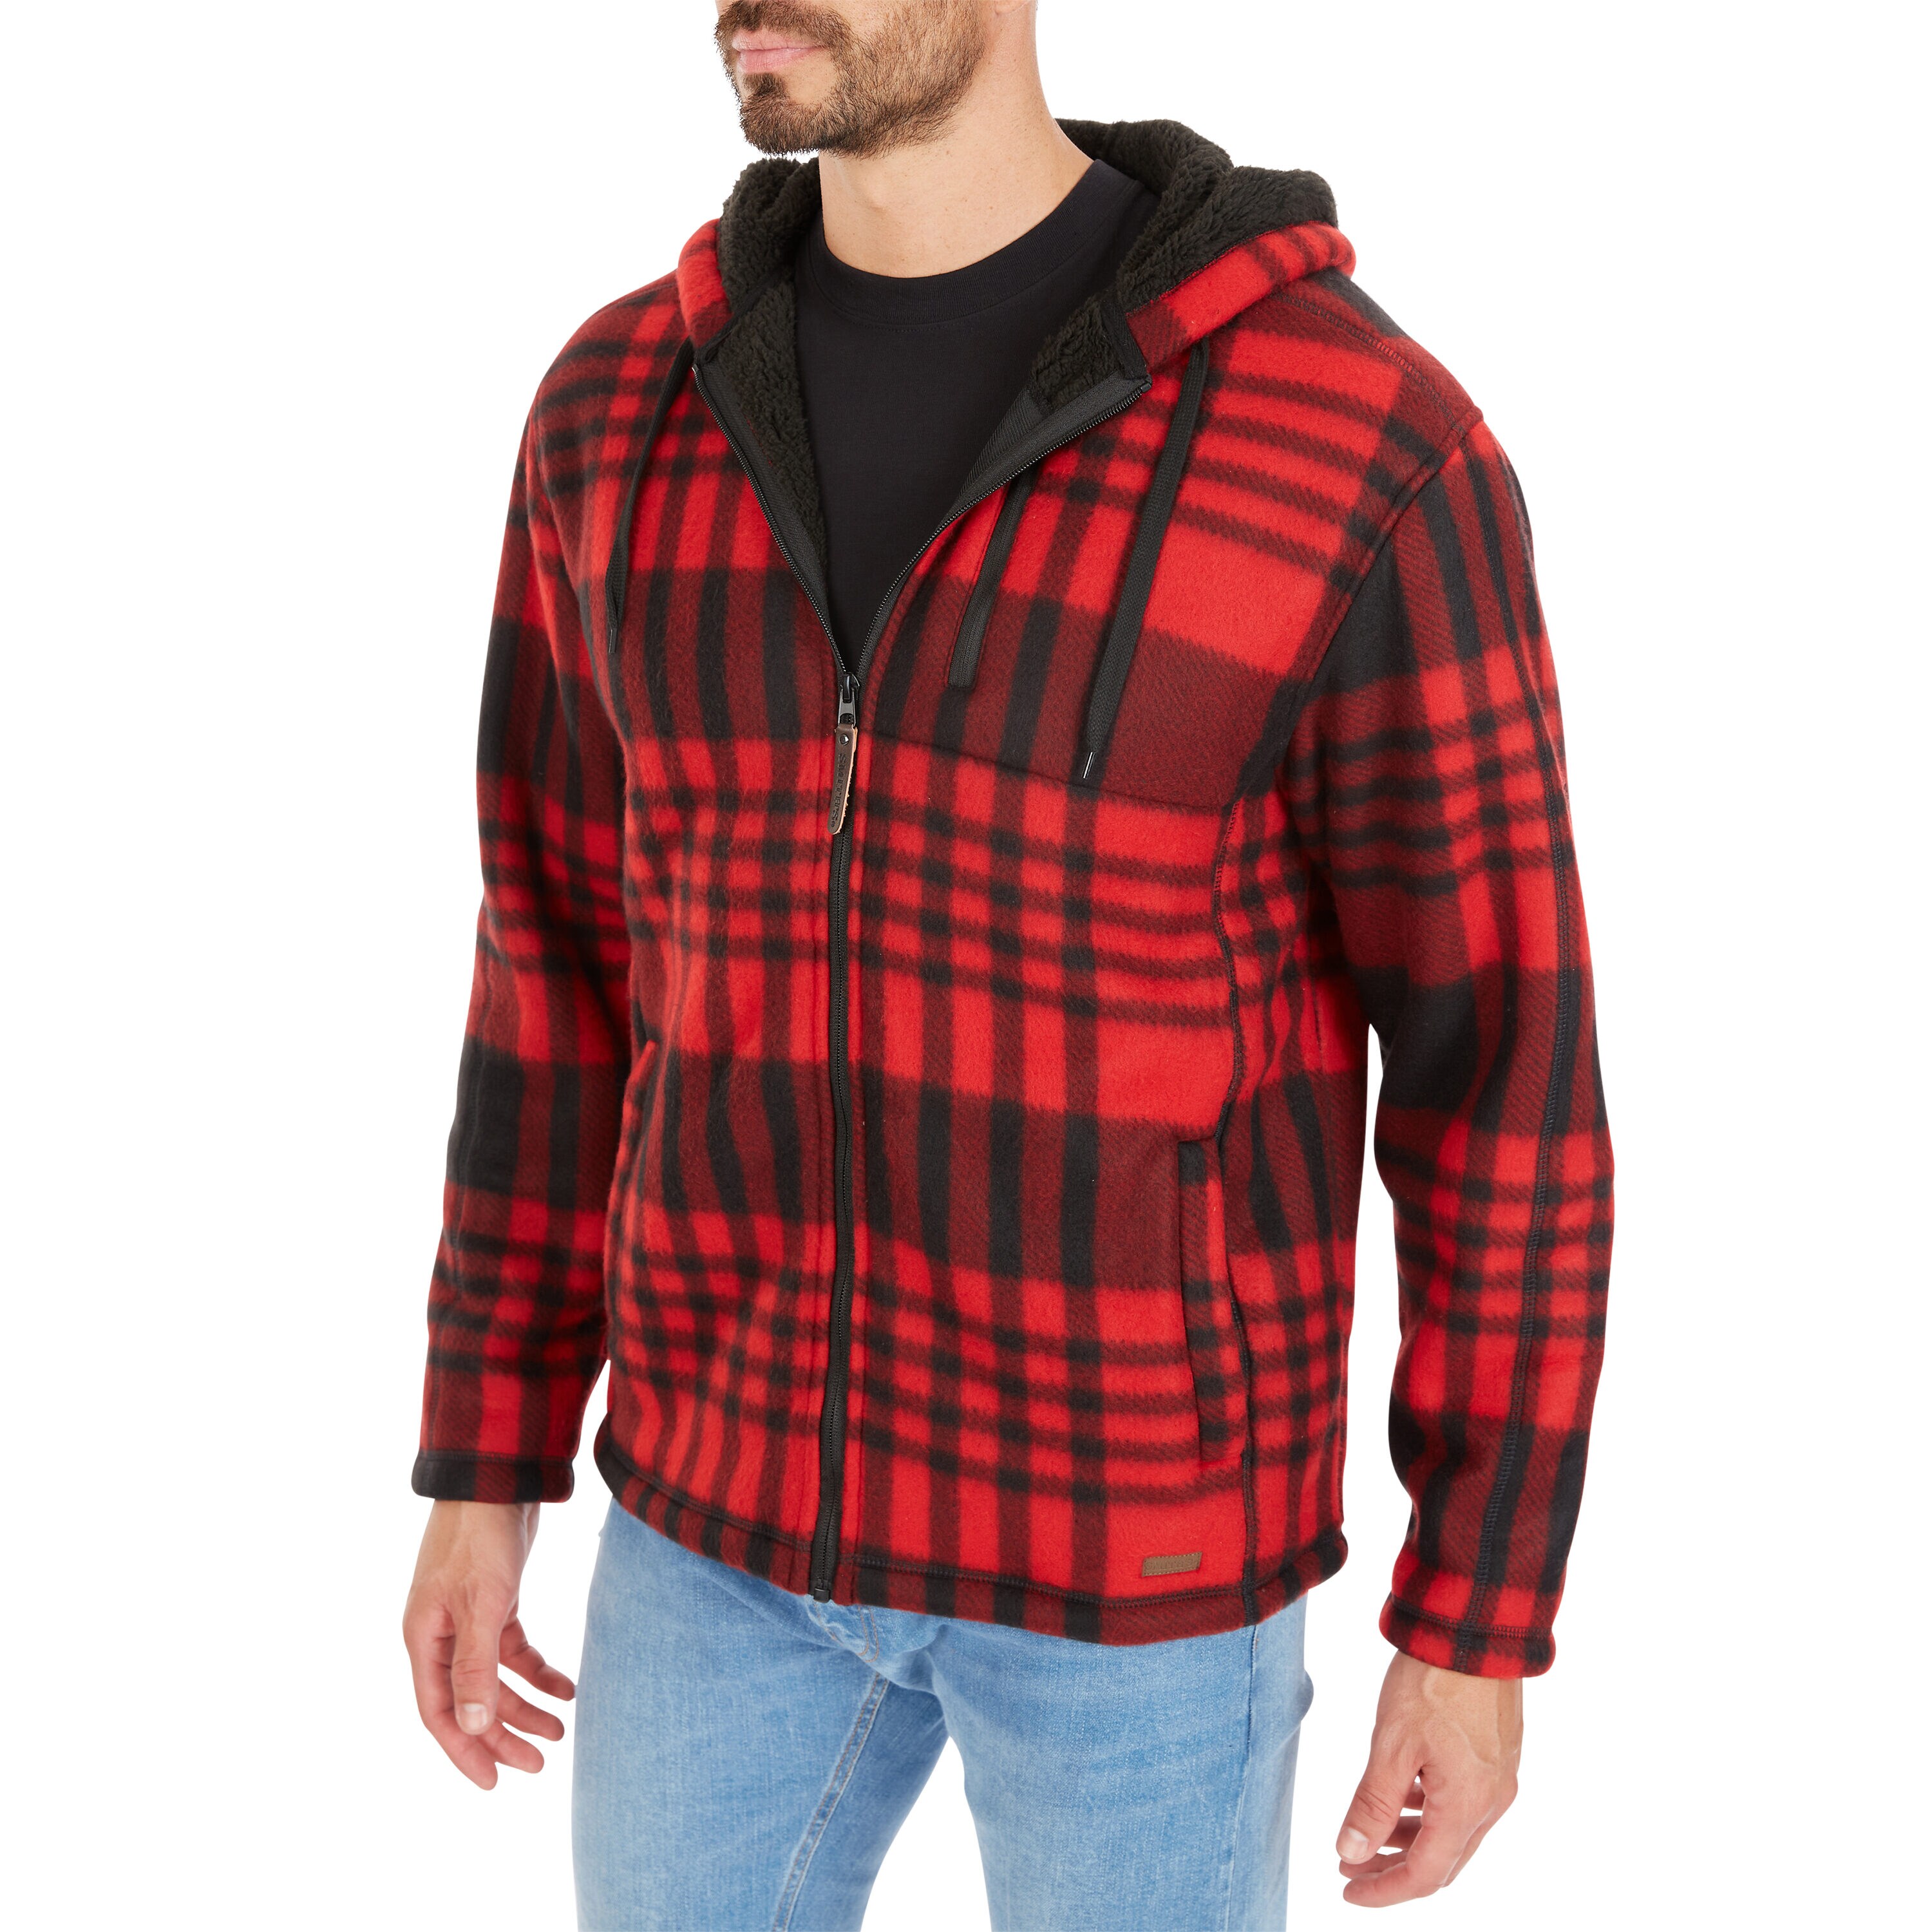 Smith\'s Workwear Butter-Sherpa Work & Fleece at Polar Hooded Plaid Jackets Lined the Full Coats department Jacket in Zip